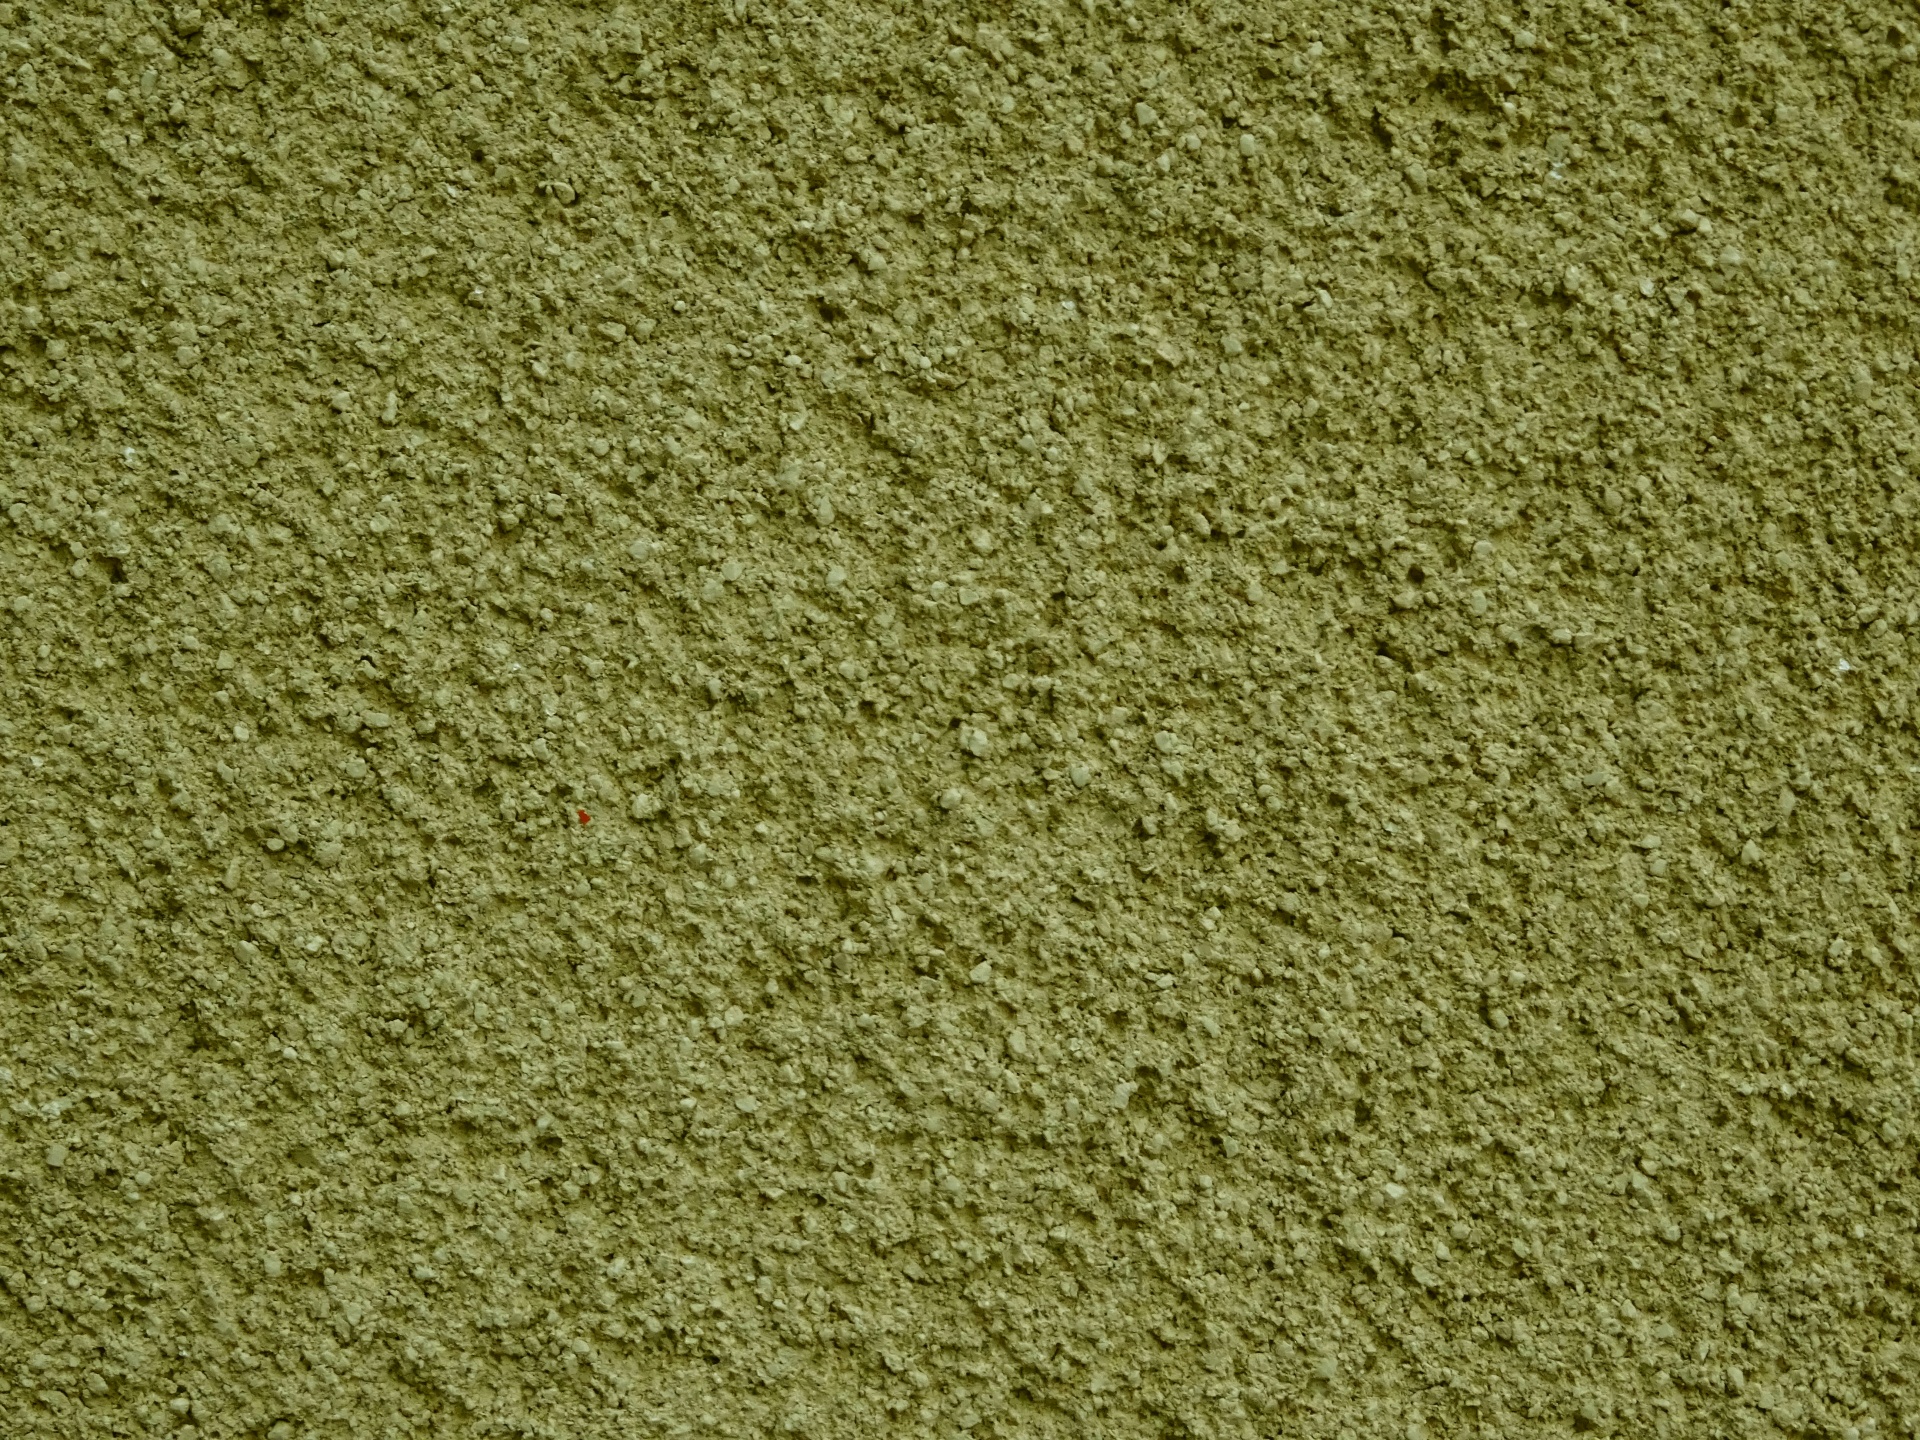 Olive Green Textured Wall , HD Wallpaper & Backgrounds